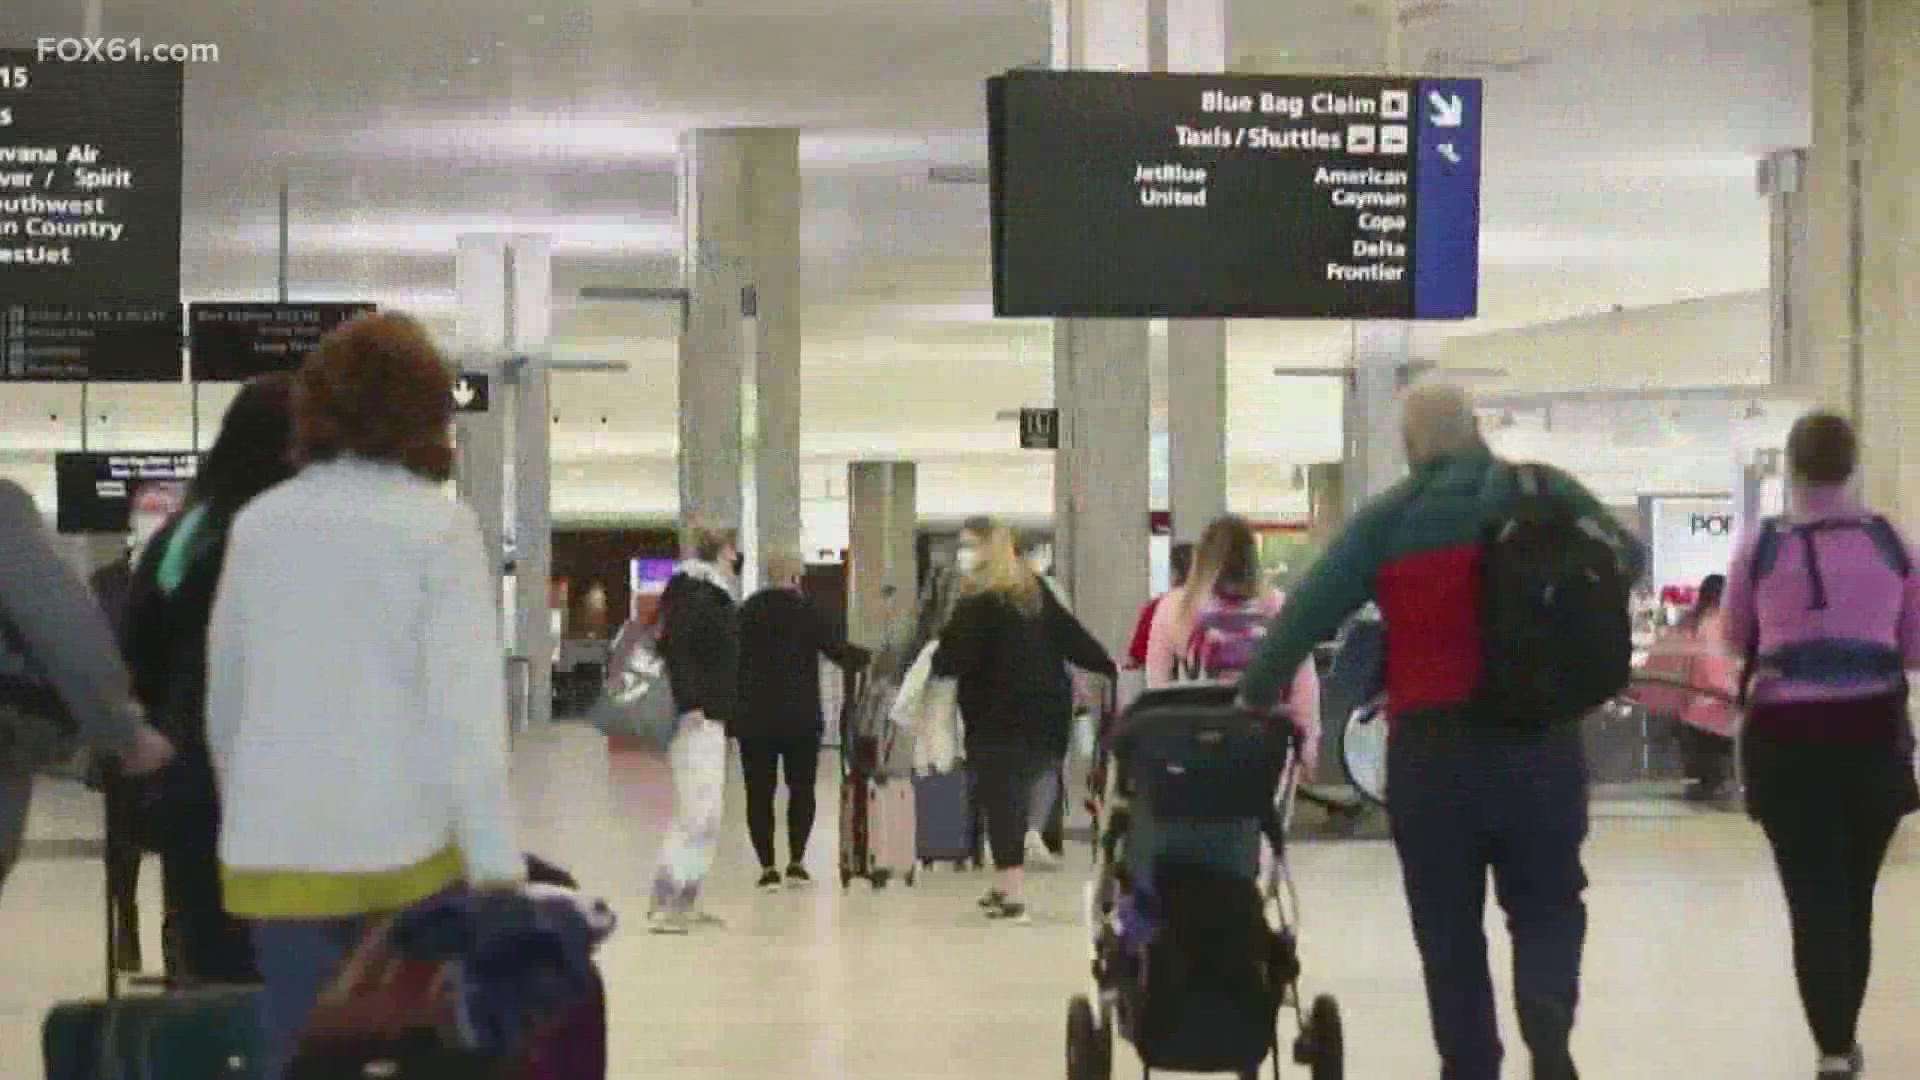 FOX61's Lindsey Kane is at Bradley International Airport to explain how flights are being impacted by jet fuel price hikes.